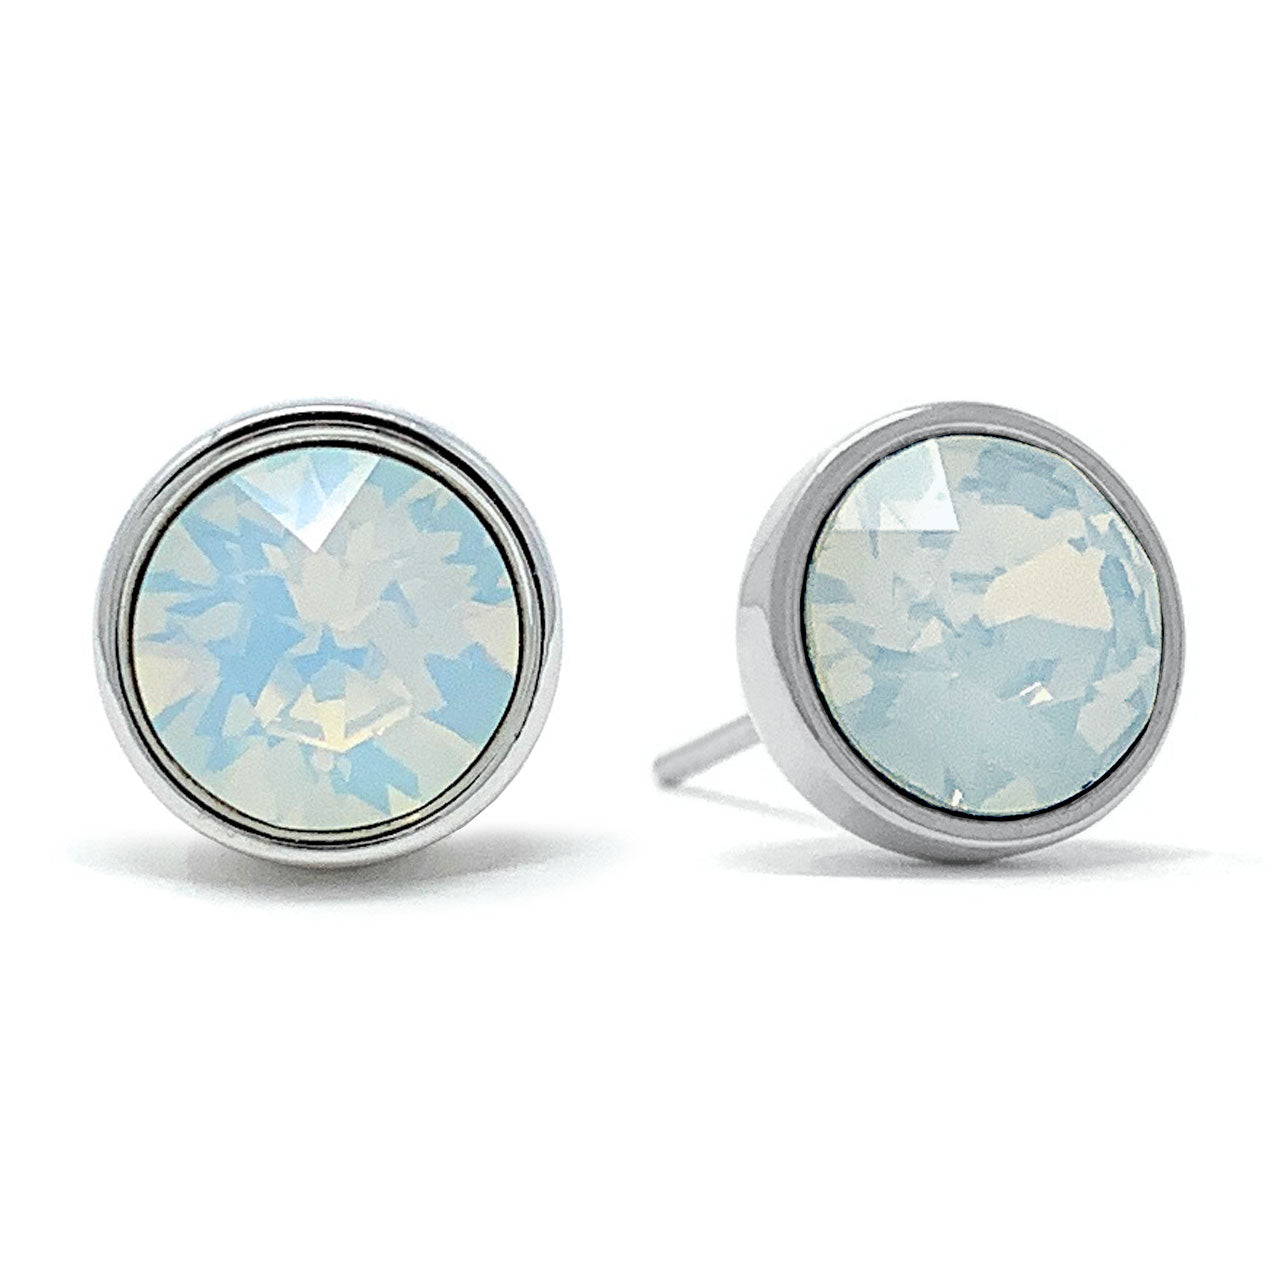 Harley Stud Earrings with Ivory White Round Opals from Swarovski Silver Toned Rhodium Plated - Ed Heart